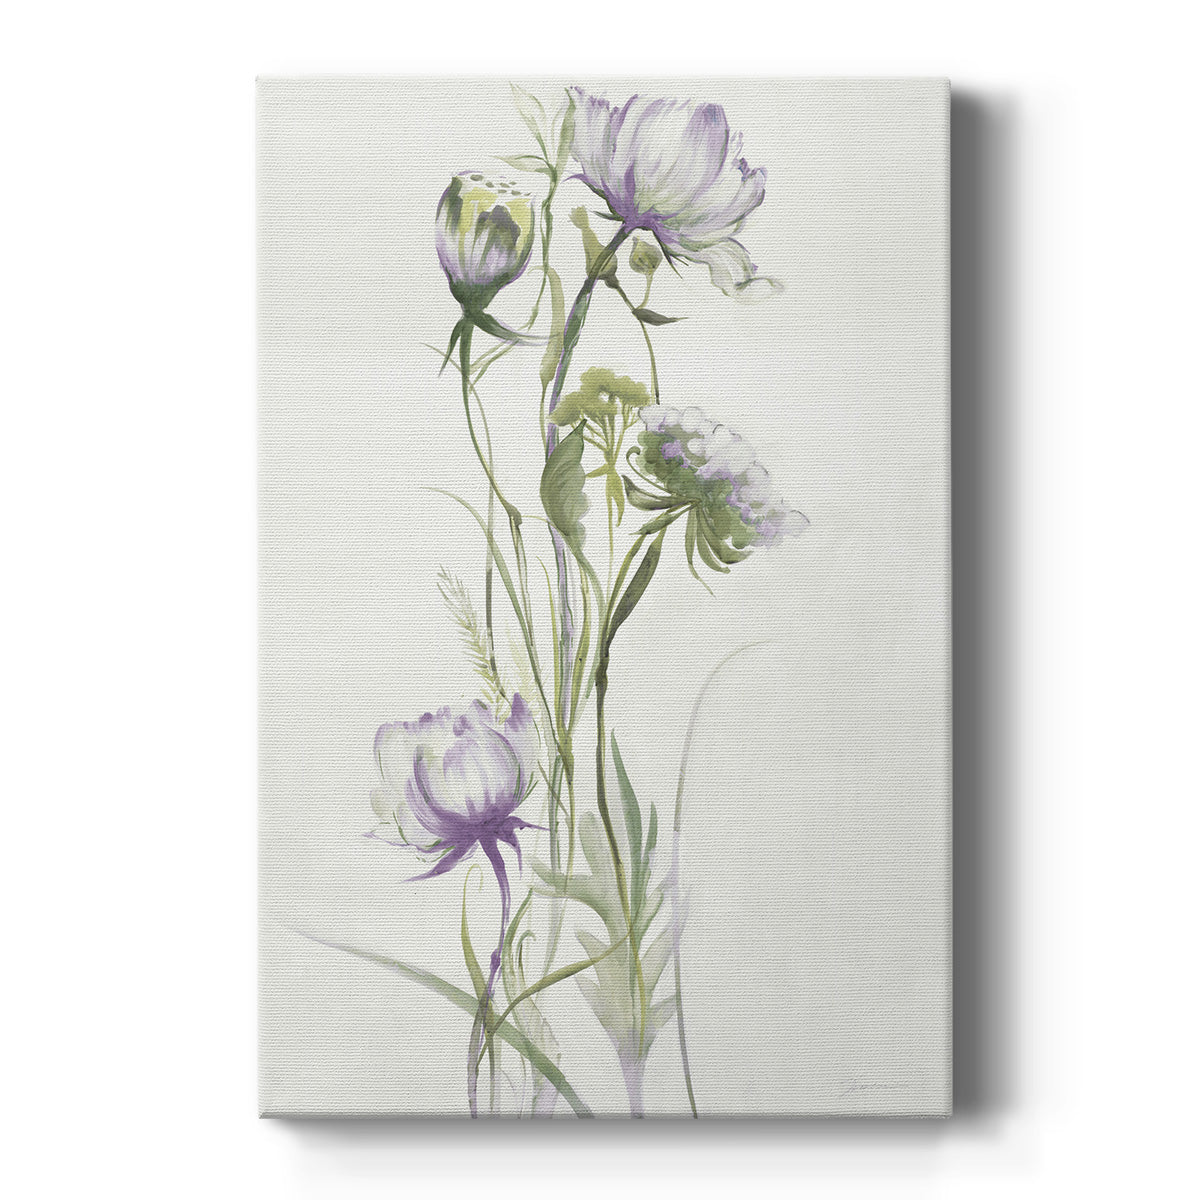 LATE SUMMER WILDFLOWERS I Premium Gallery Wrapped Canvas - Ready to Hang